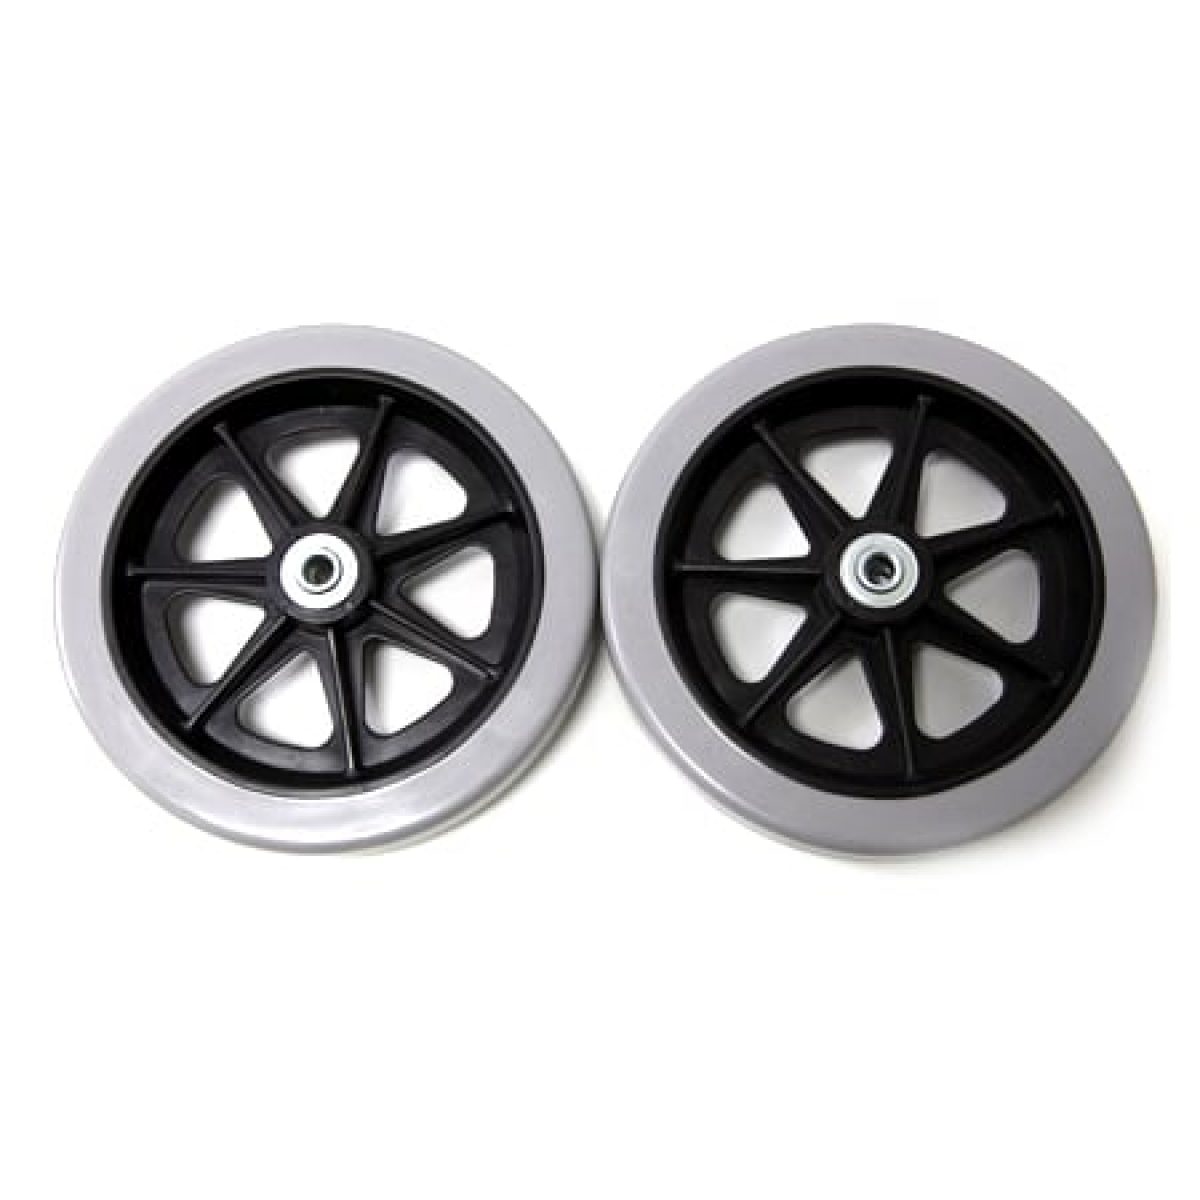 Wheelchair Front Wheels 7 Inch Rubber Single Wheel Quality Front Caster Wear-resistant Non-slip Durable Use Front Wheelchair Wheel